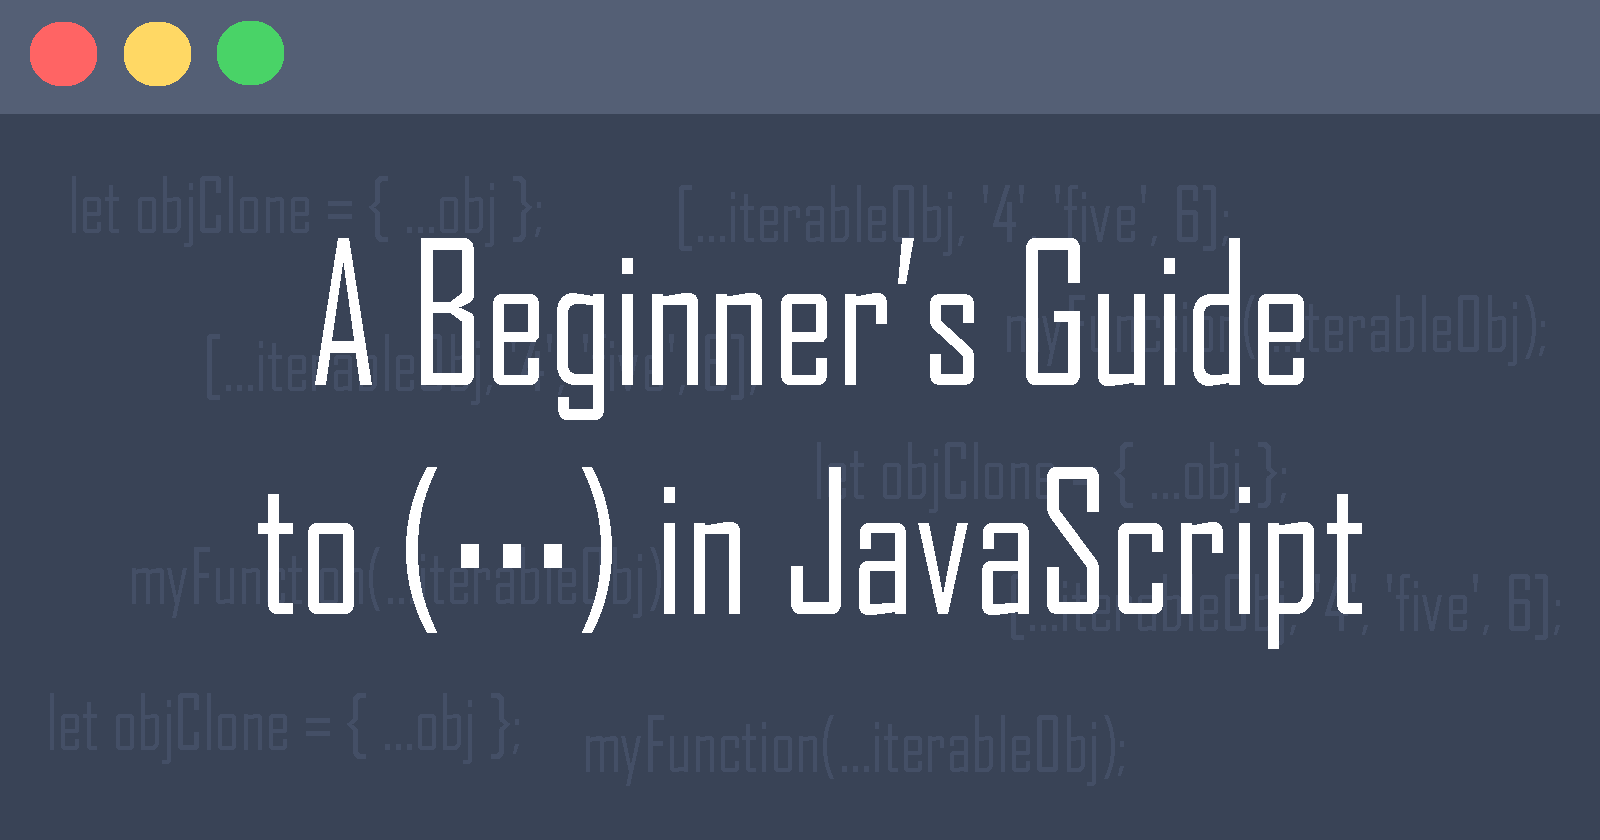 best way to learn javascript for beginners